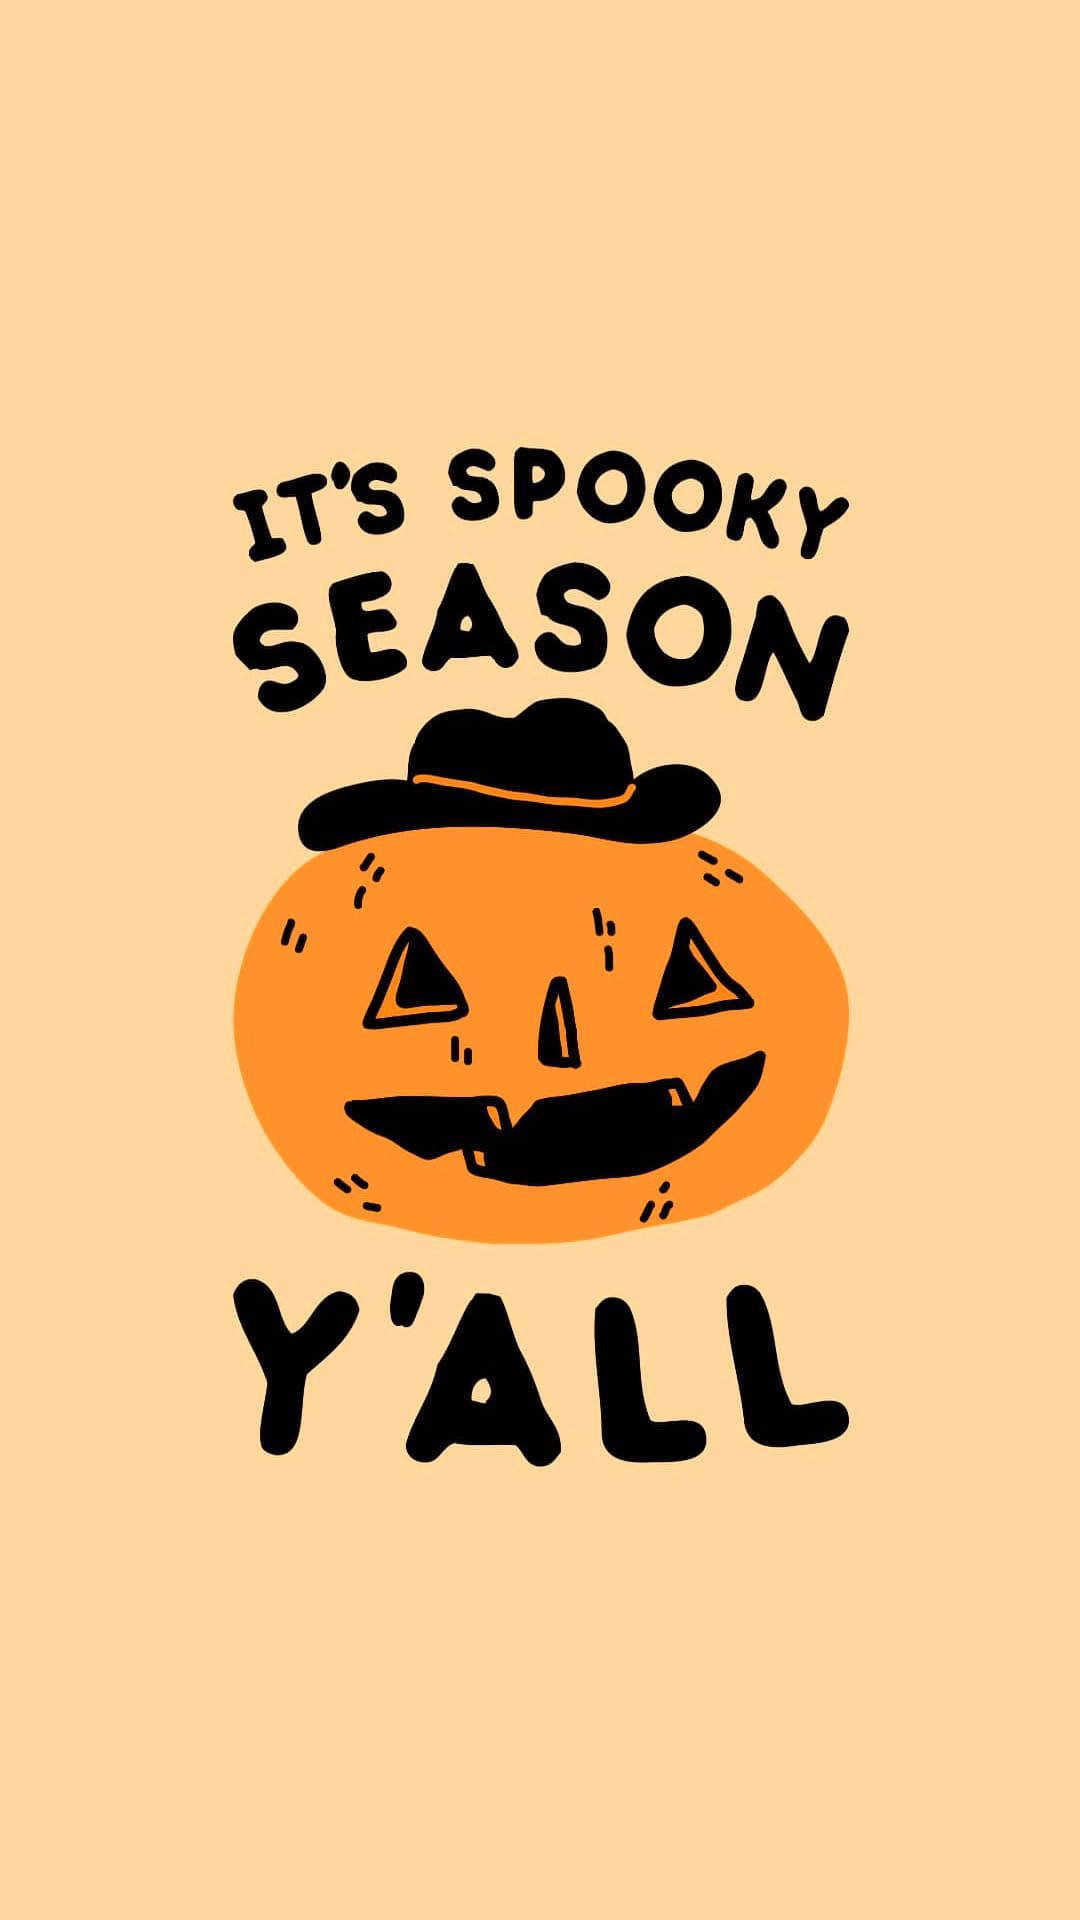 "Welcome to Spooky Season! Get ready for the spooky rides, costumes, and festivities." Wallpaper